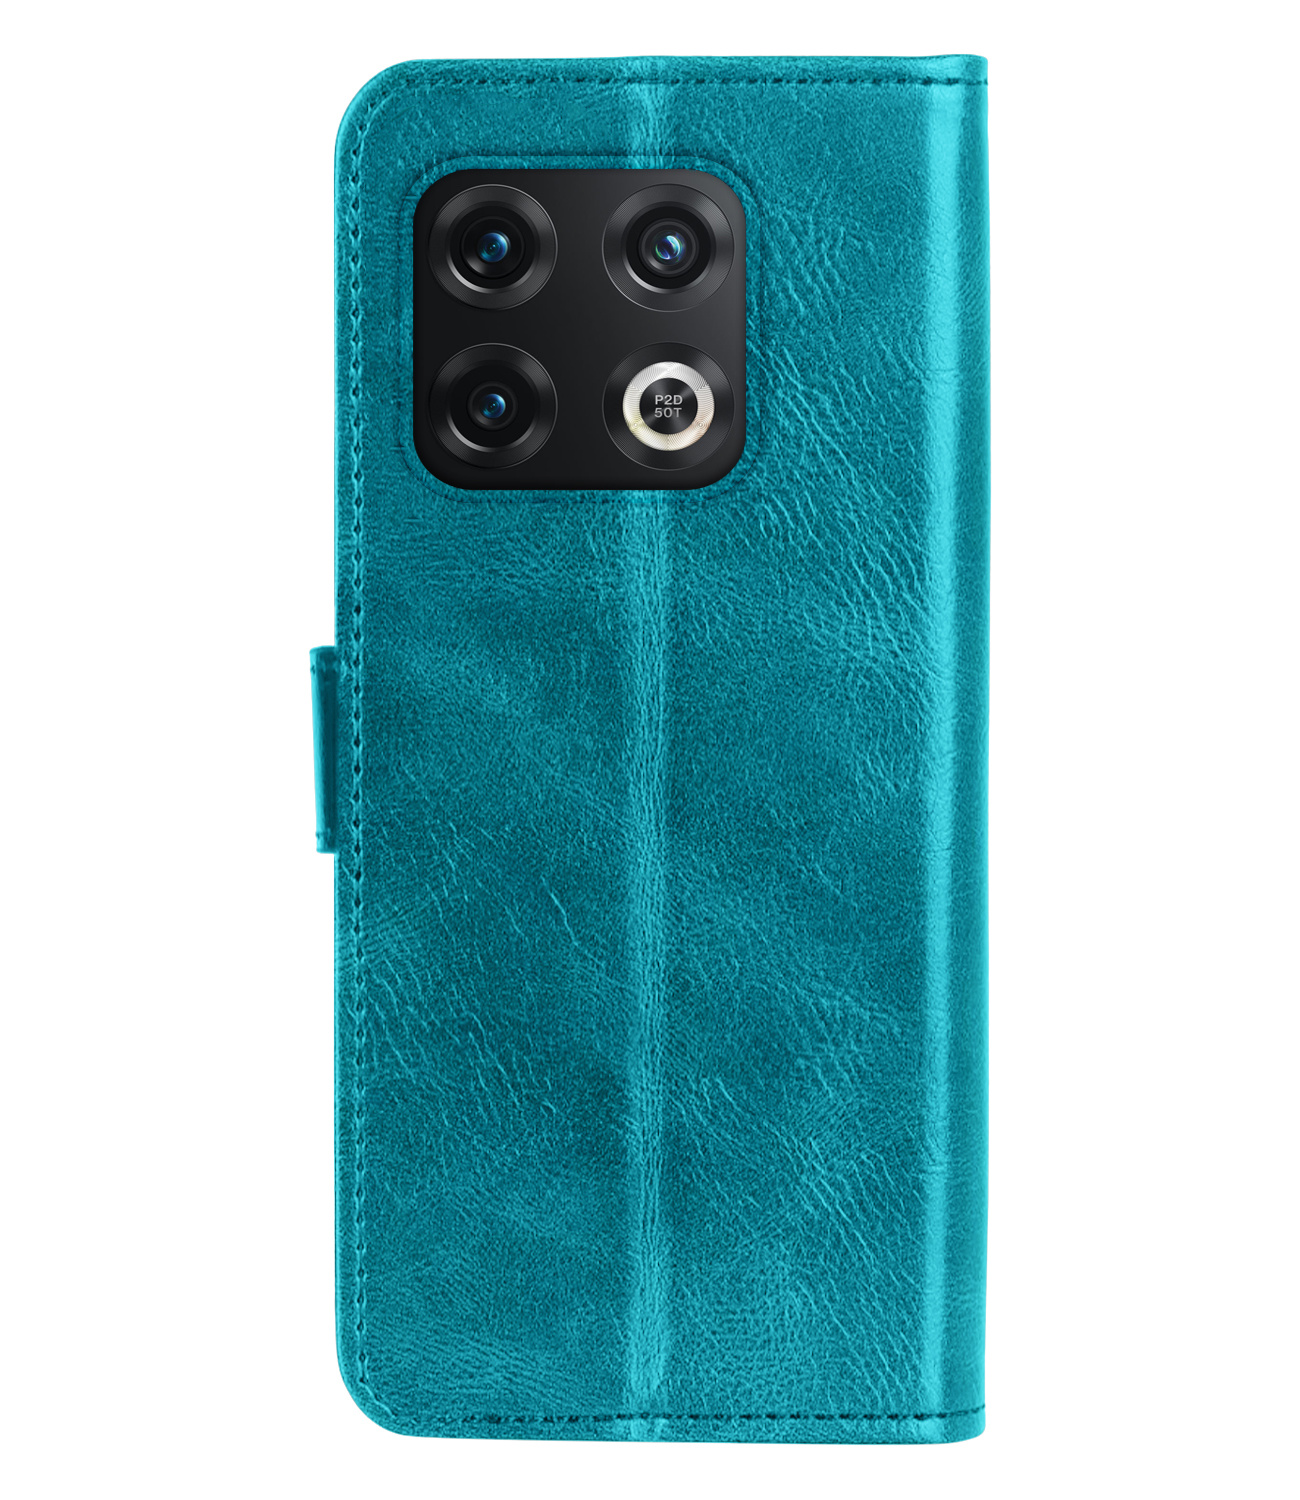 Nomfy OnePlus 10 Pro Hoes Bookcase Turquoise - Flipcase Turquoise - OnePlus 10 Pro Book Cover - OnePlus 10 Pro Hoesje Turquoise